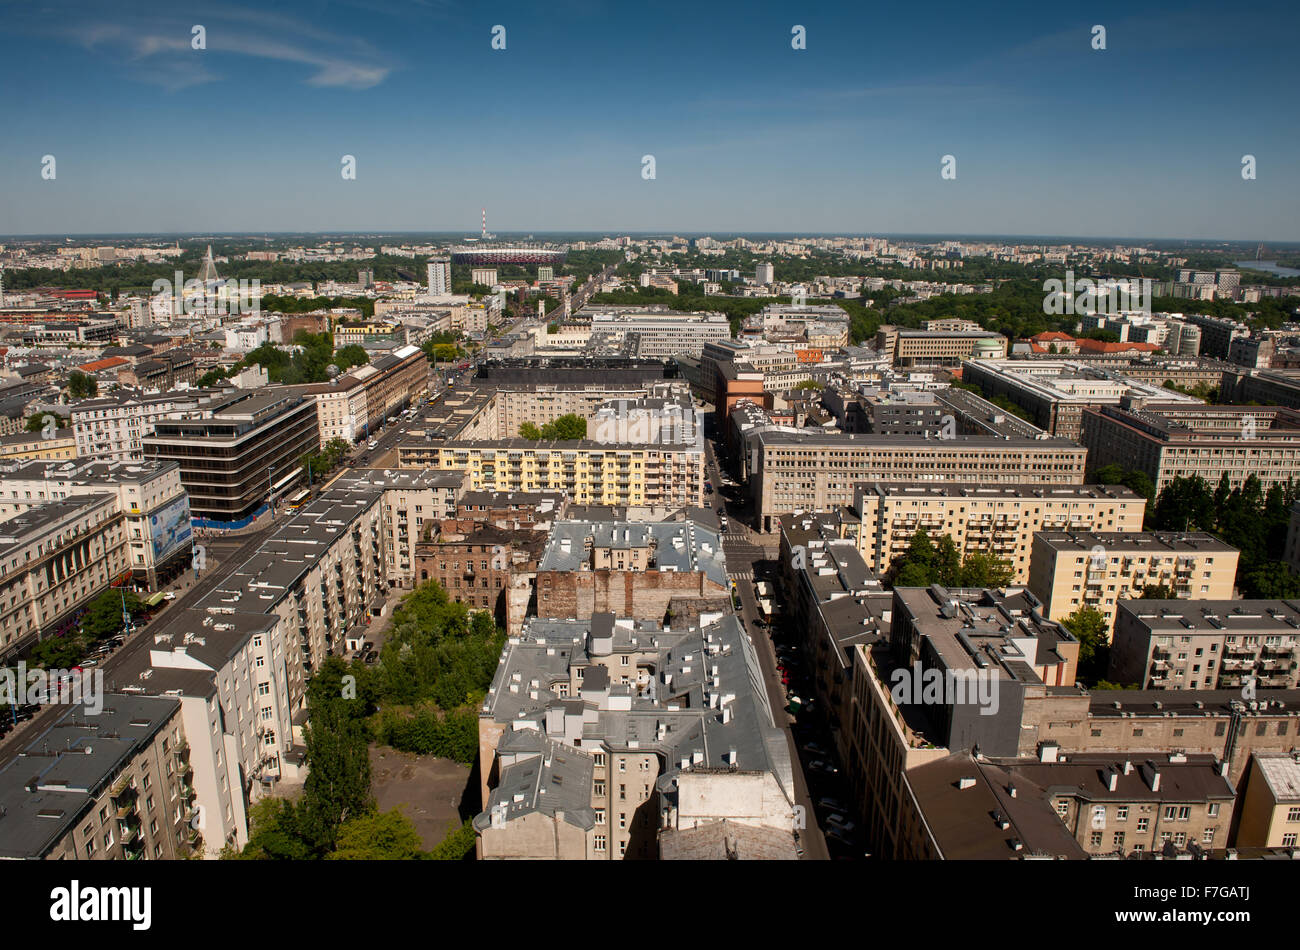 Warsaw skyline view from the hotel high level window, aerial outline urban landscape of buildings in wide angle, tourist travel Stock Photo